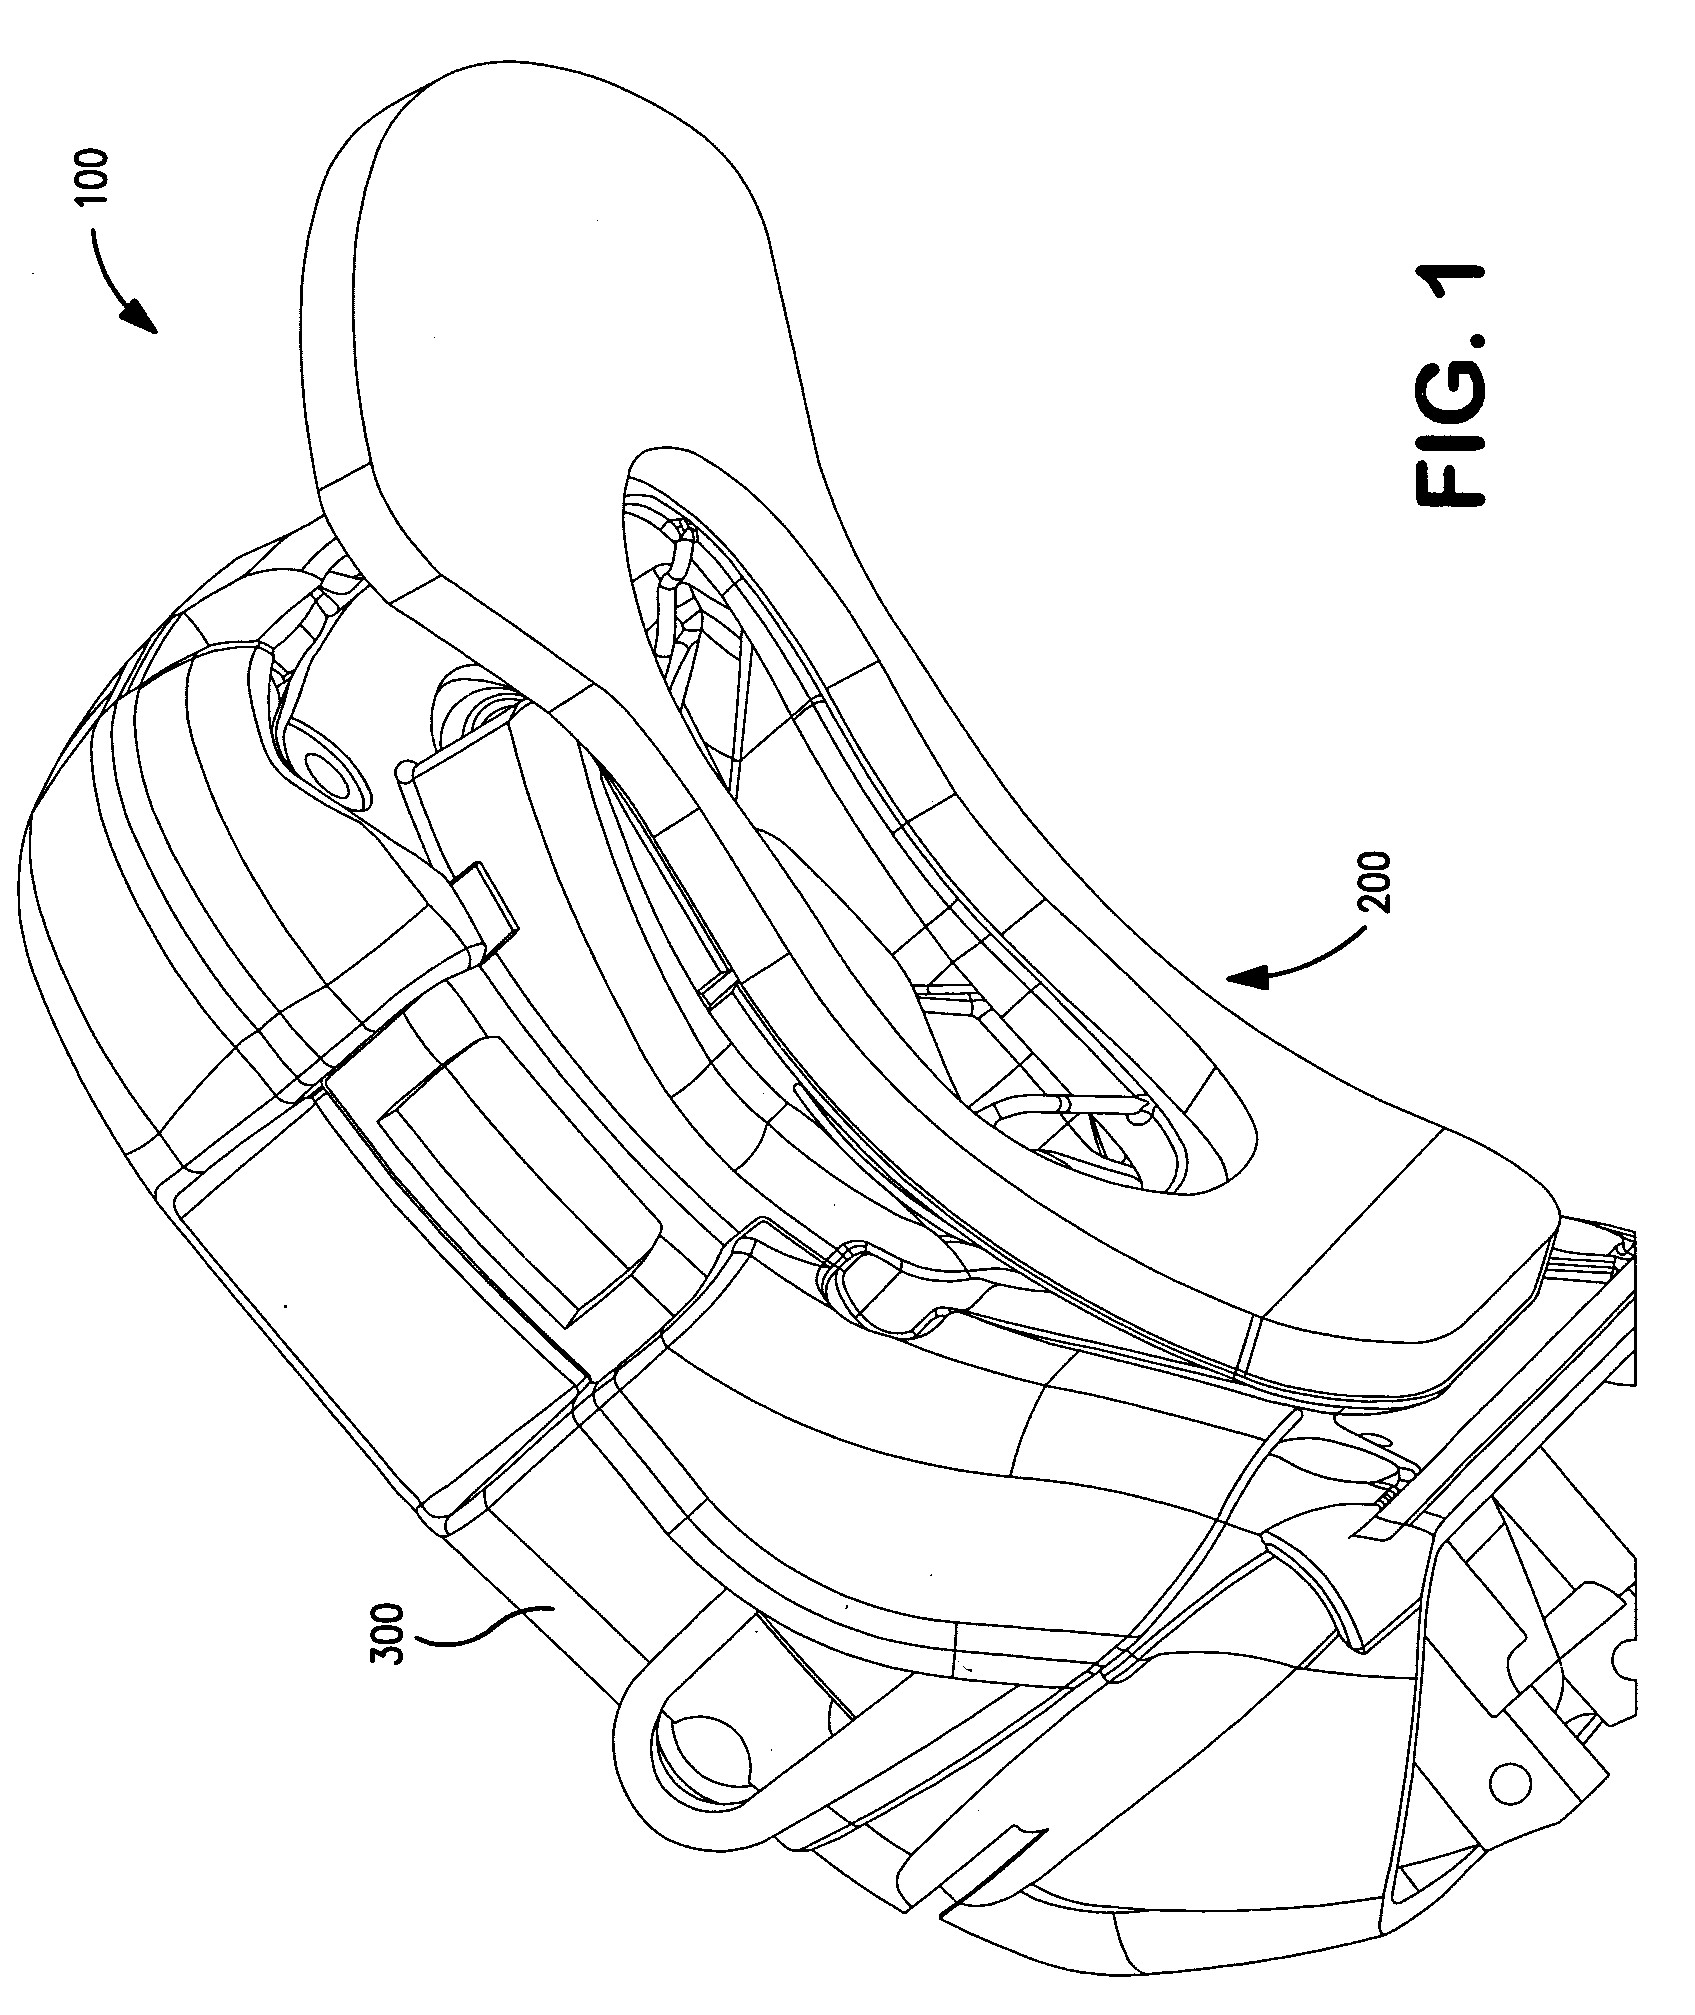 Apparatus and methods for non-invasively measuring a patient's arterial blood pressure